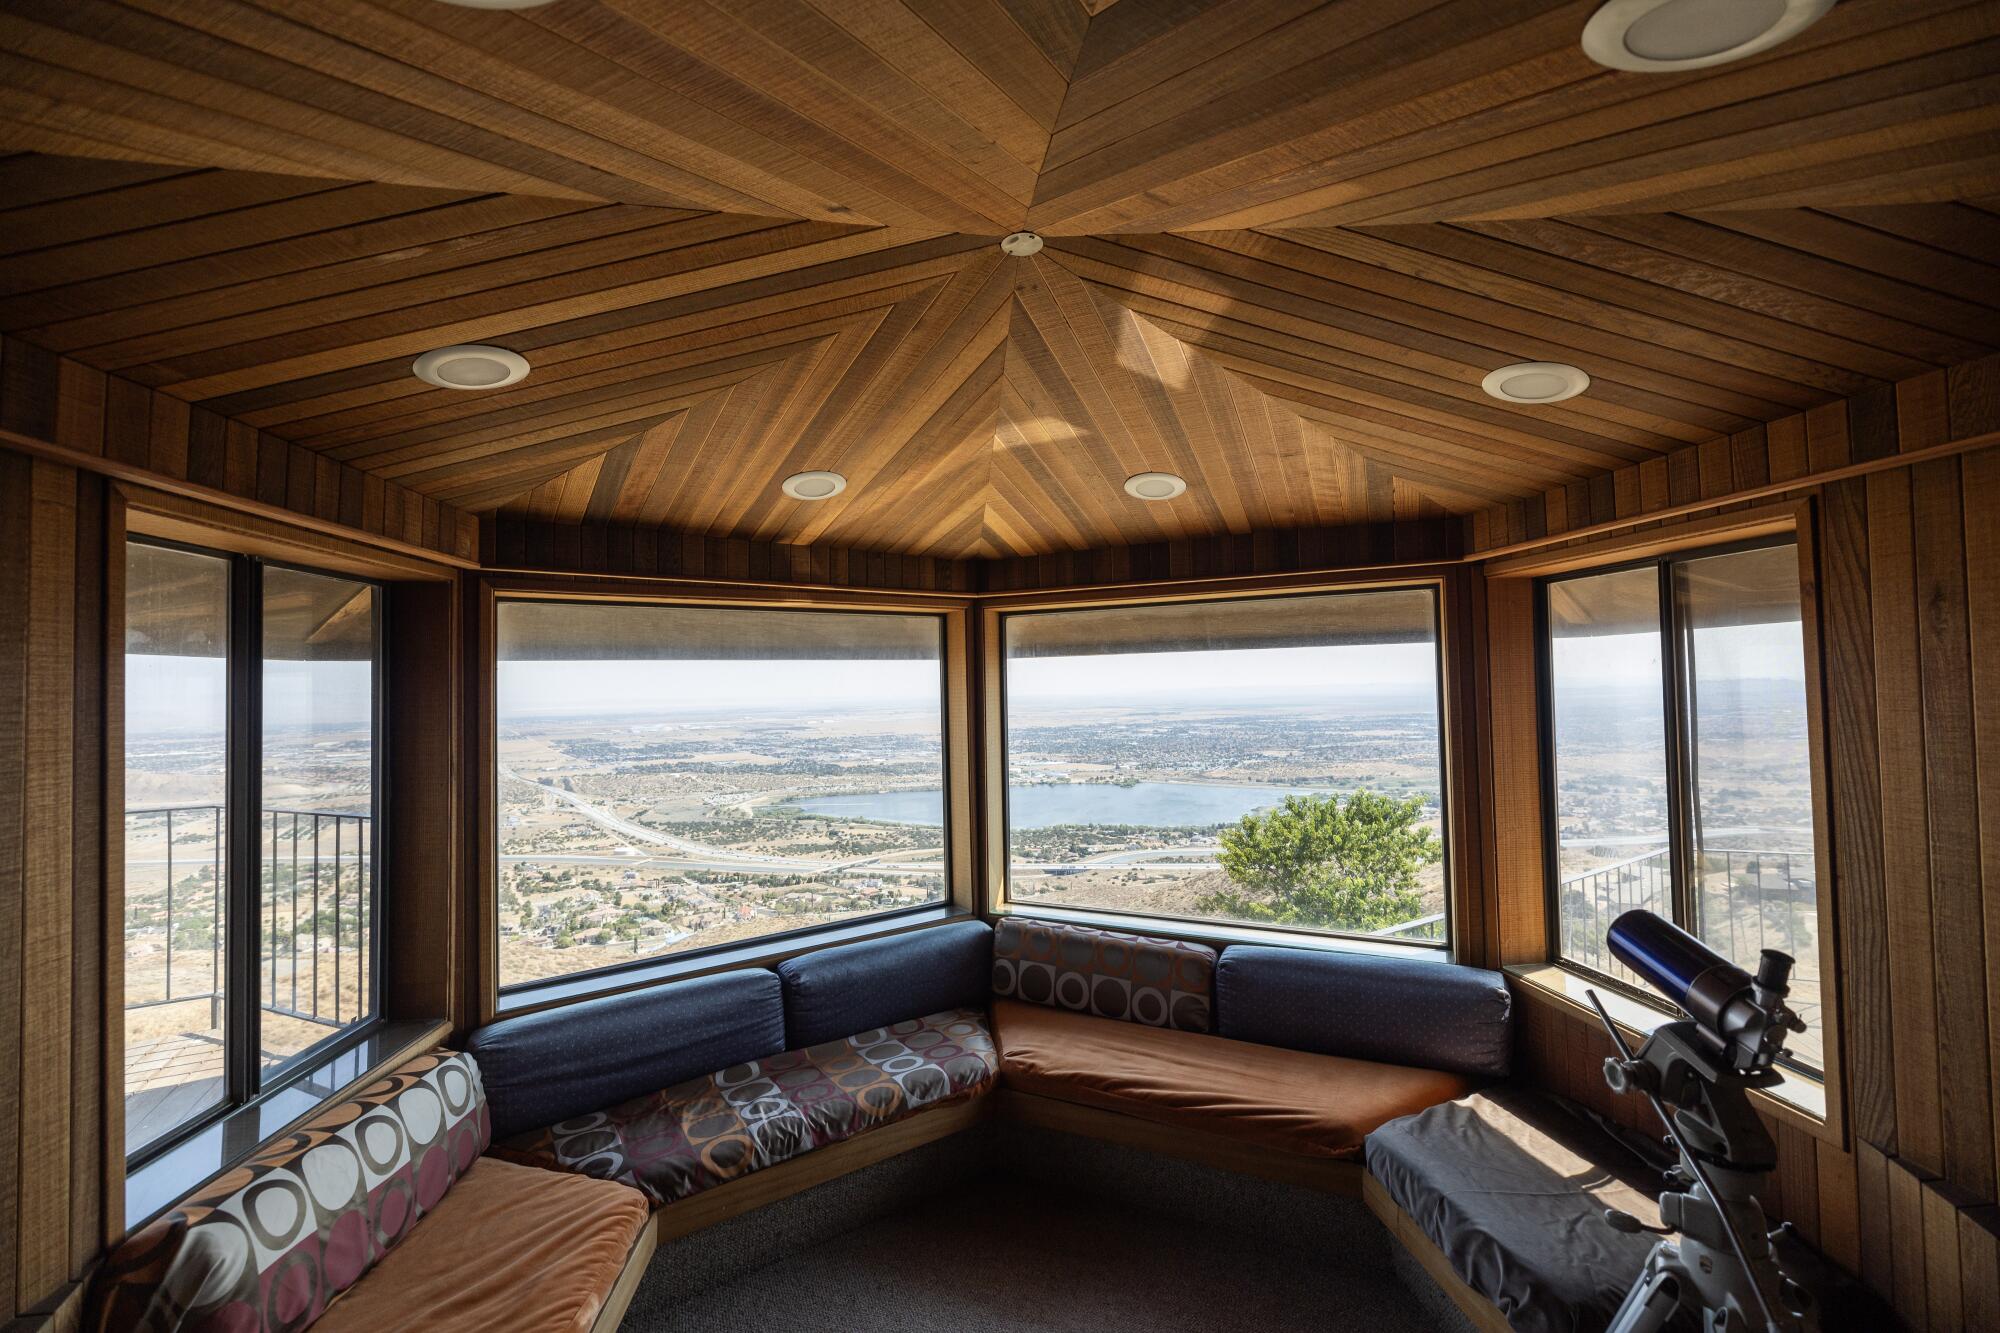 A room with a view in this J. Herbert Brownell-designed hilltop mansion above Palmdale.